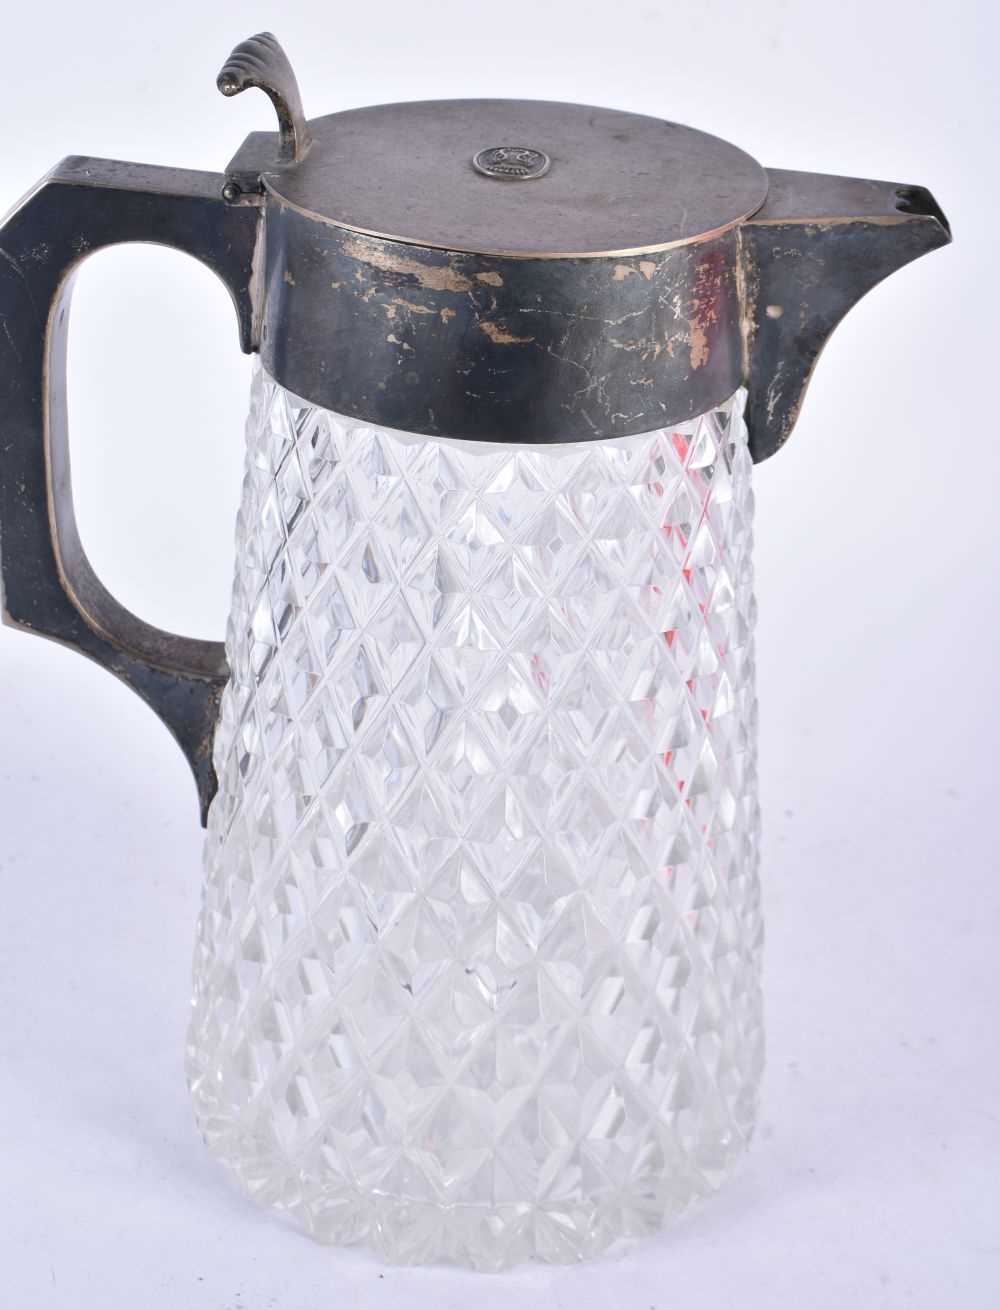 A Silver Mounted Claret Jug with Hob Nail Cut Glass. 22cm x 17cm x 12cm - Image 2 of 4